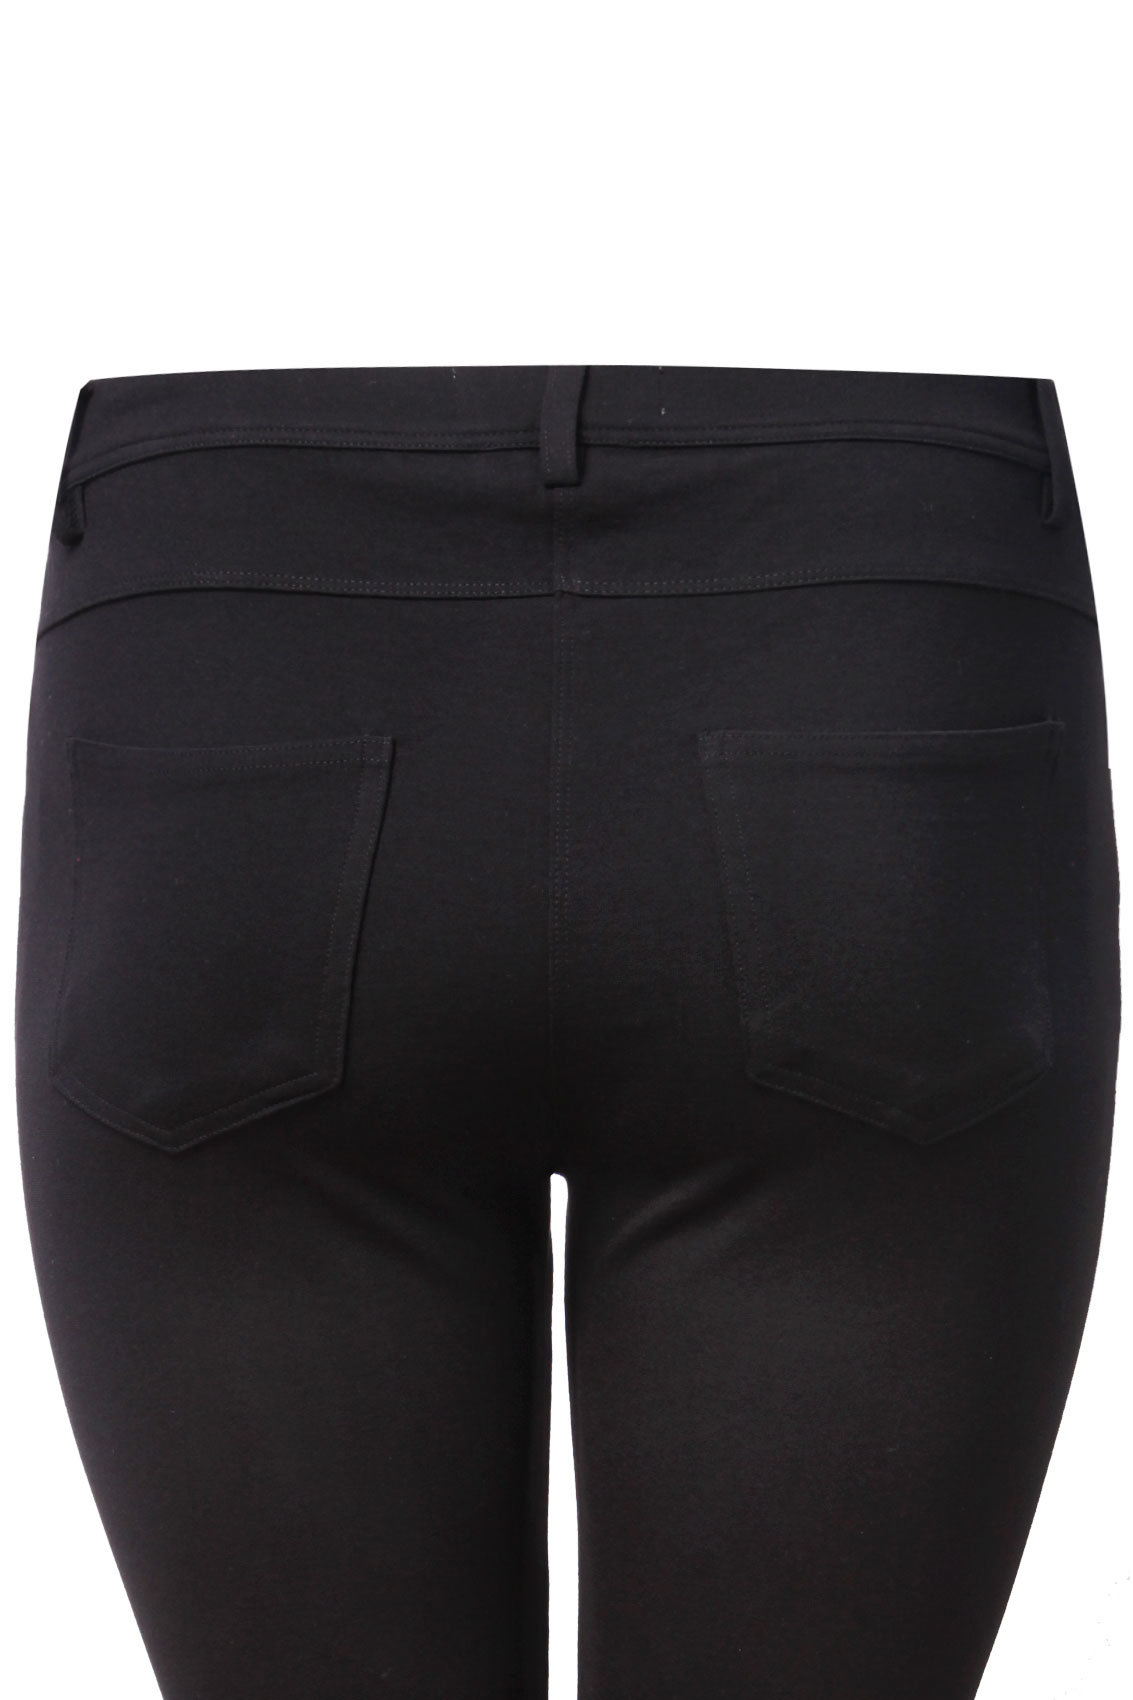 Black Ponte Stretch Jersey Trousers plus Size 16 to 32